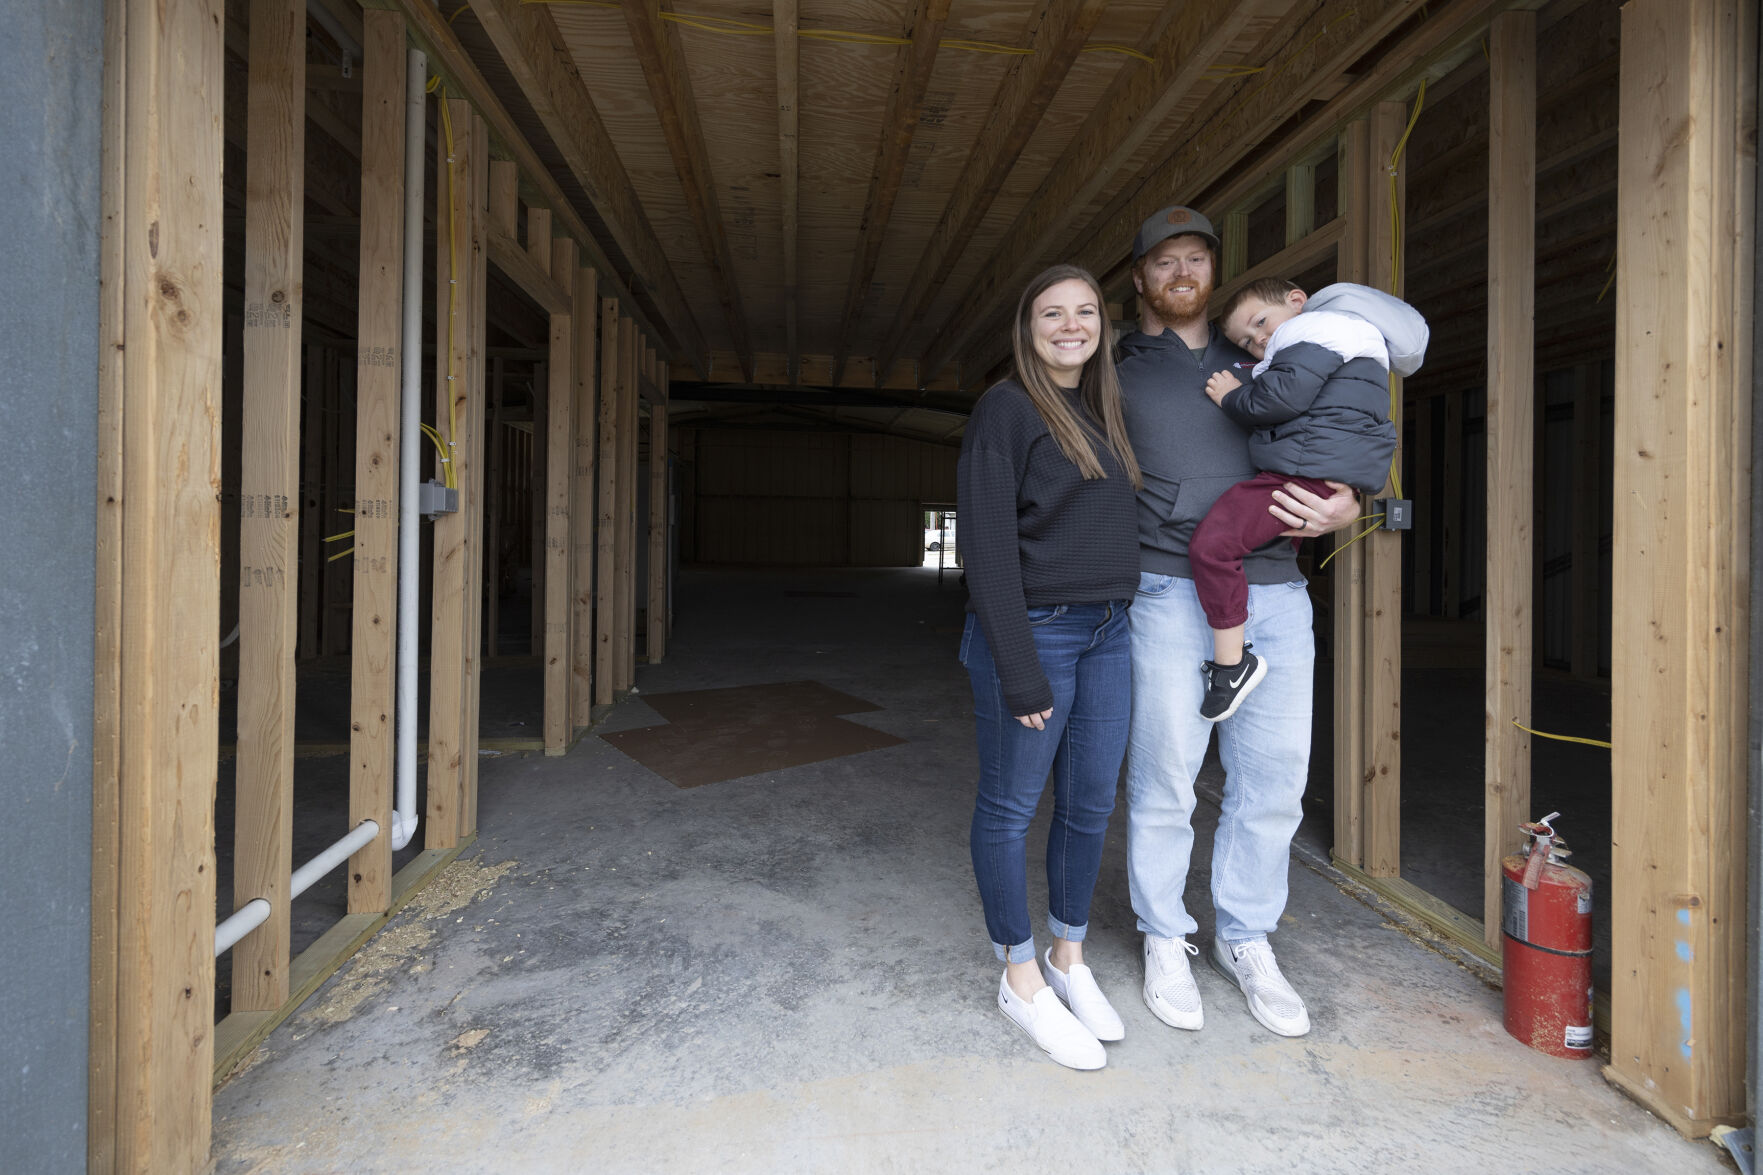 Owners Sammy, (left) Spencer and son Jaxon Scar inside what will become Timber City Fitness in Maquoketa, Iowa. Photo taken Friday, Nov. 12, 2022.    PHOTO CREDIT: Stephen Gassman